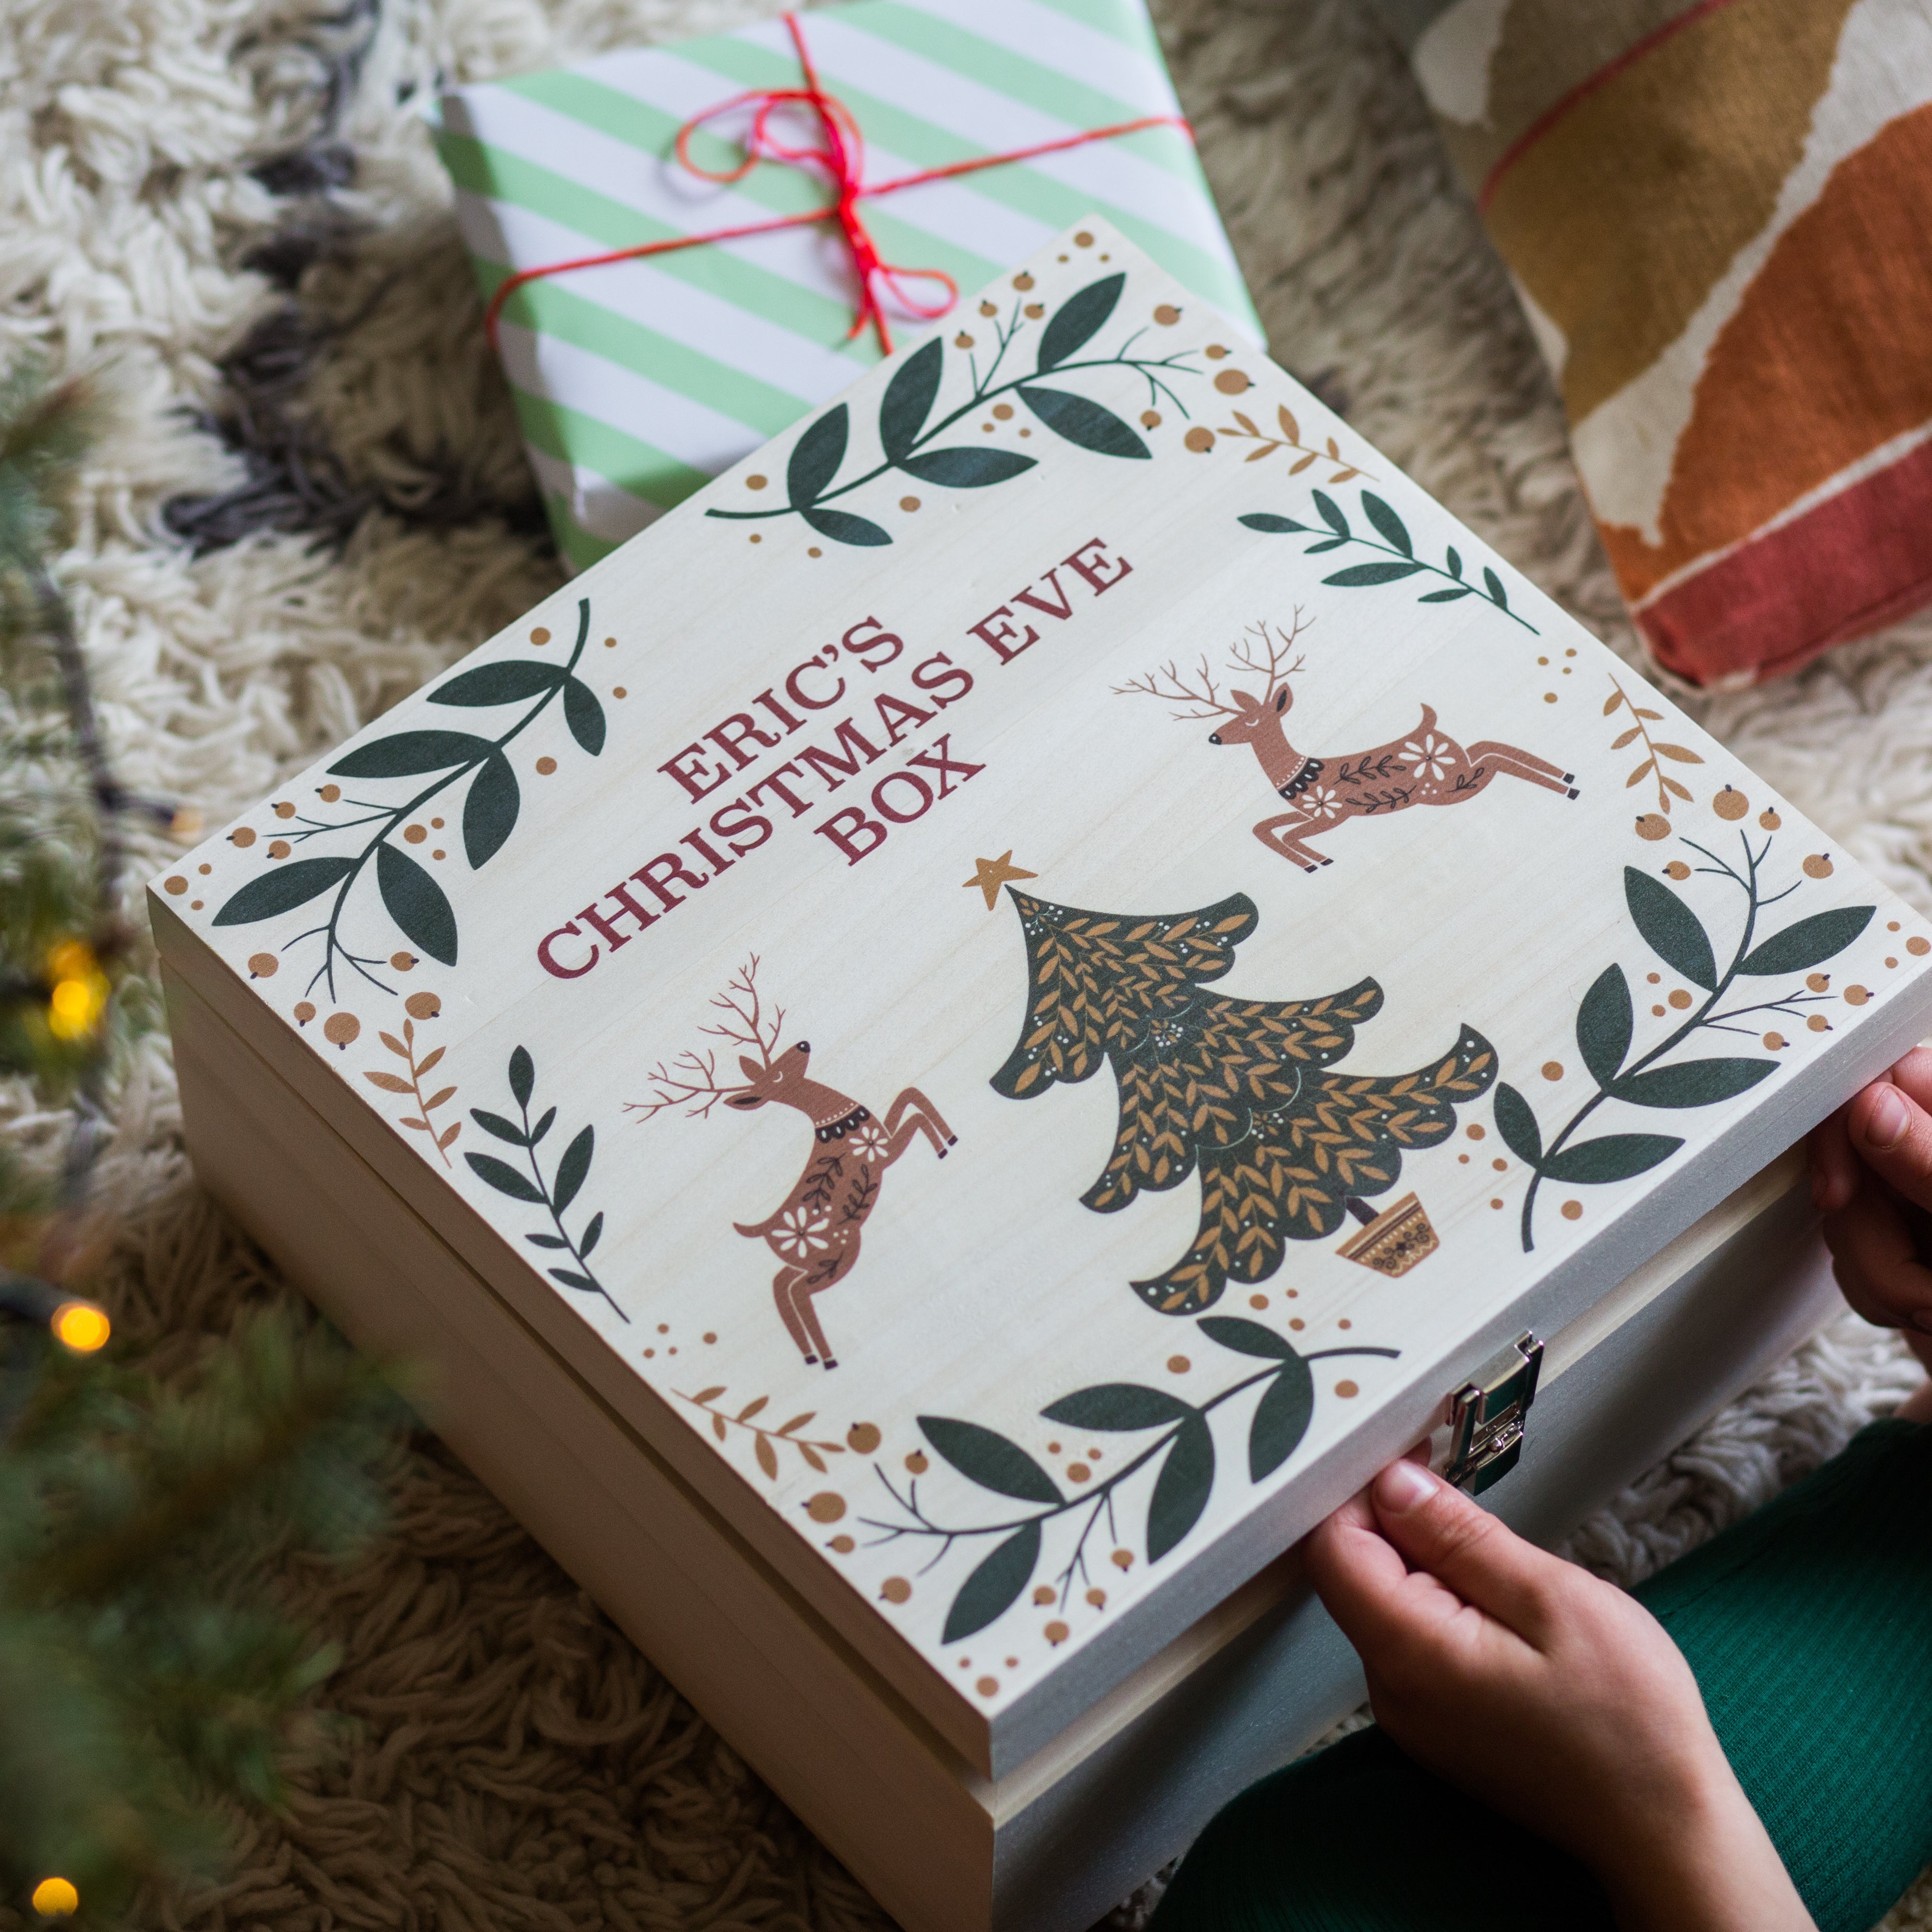 Personalised Reindeer And Tree Christmas Eve Wooden Box